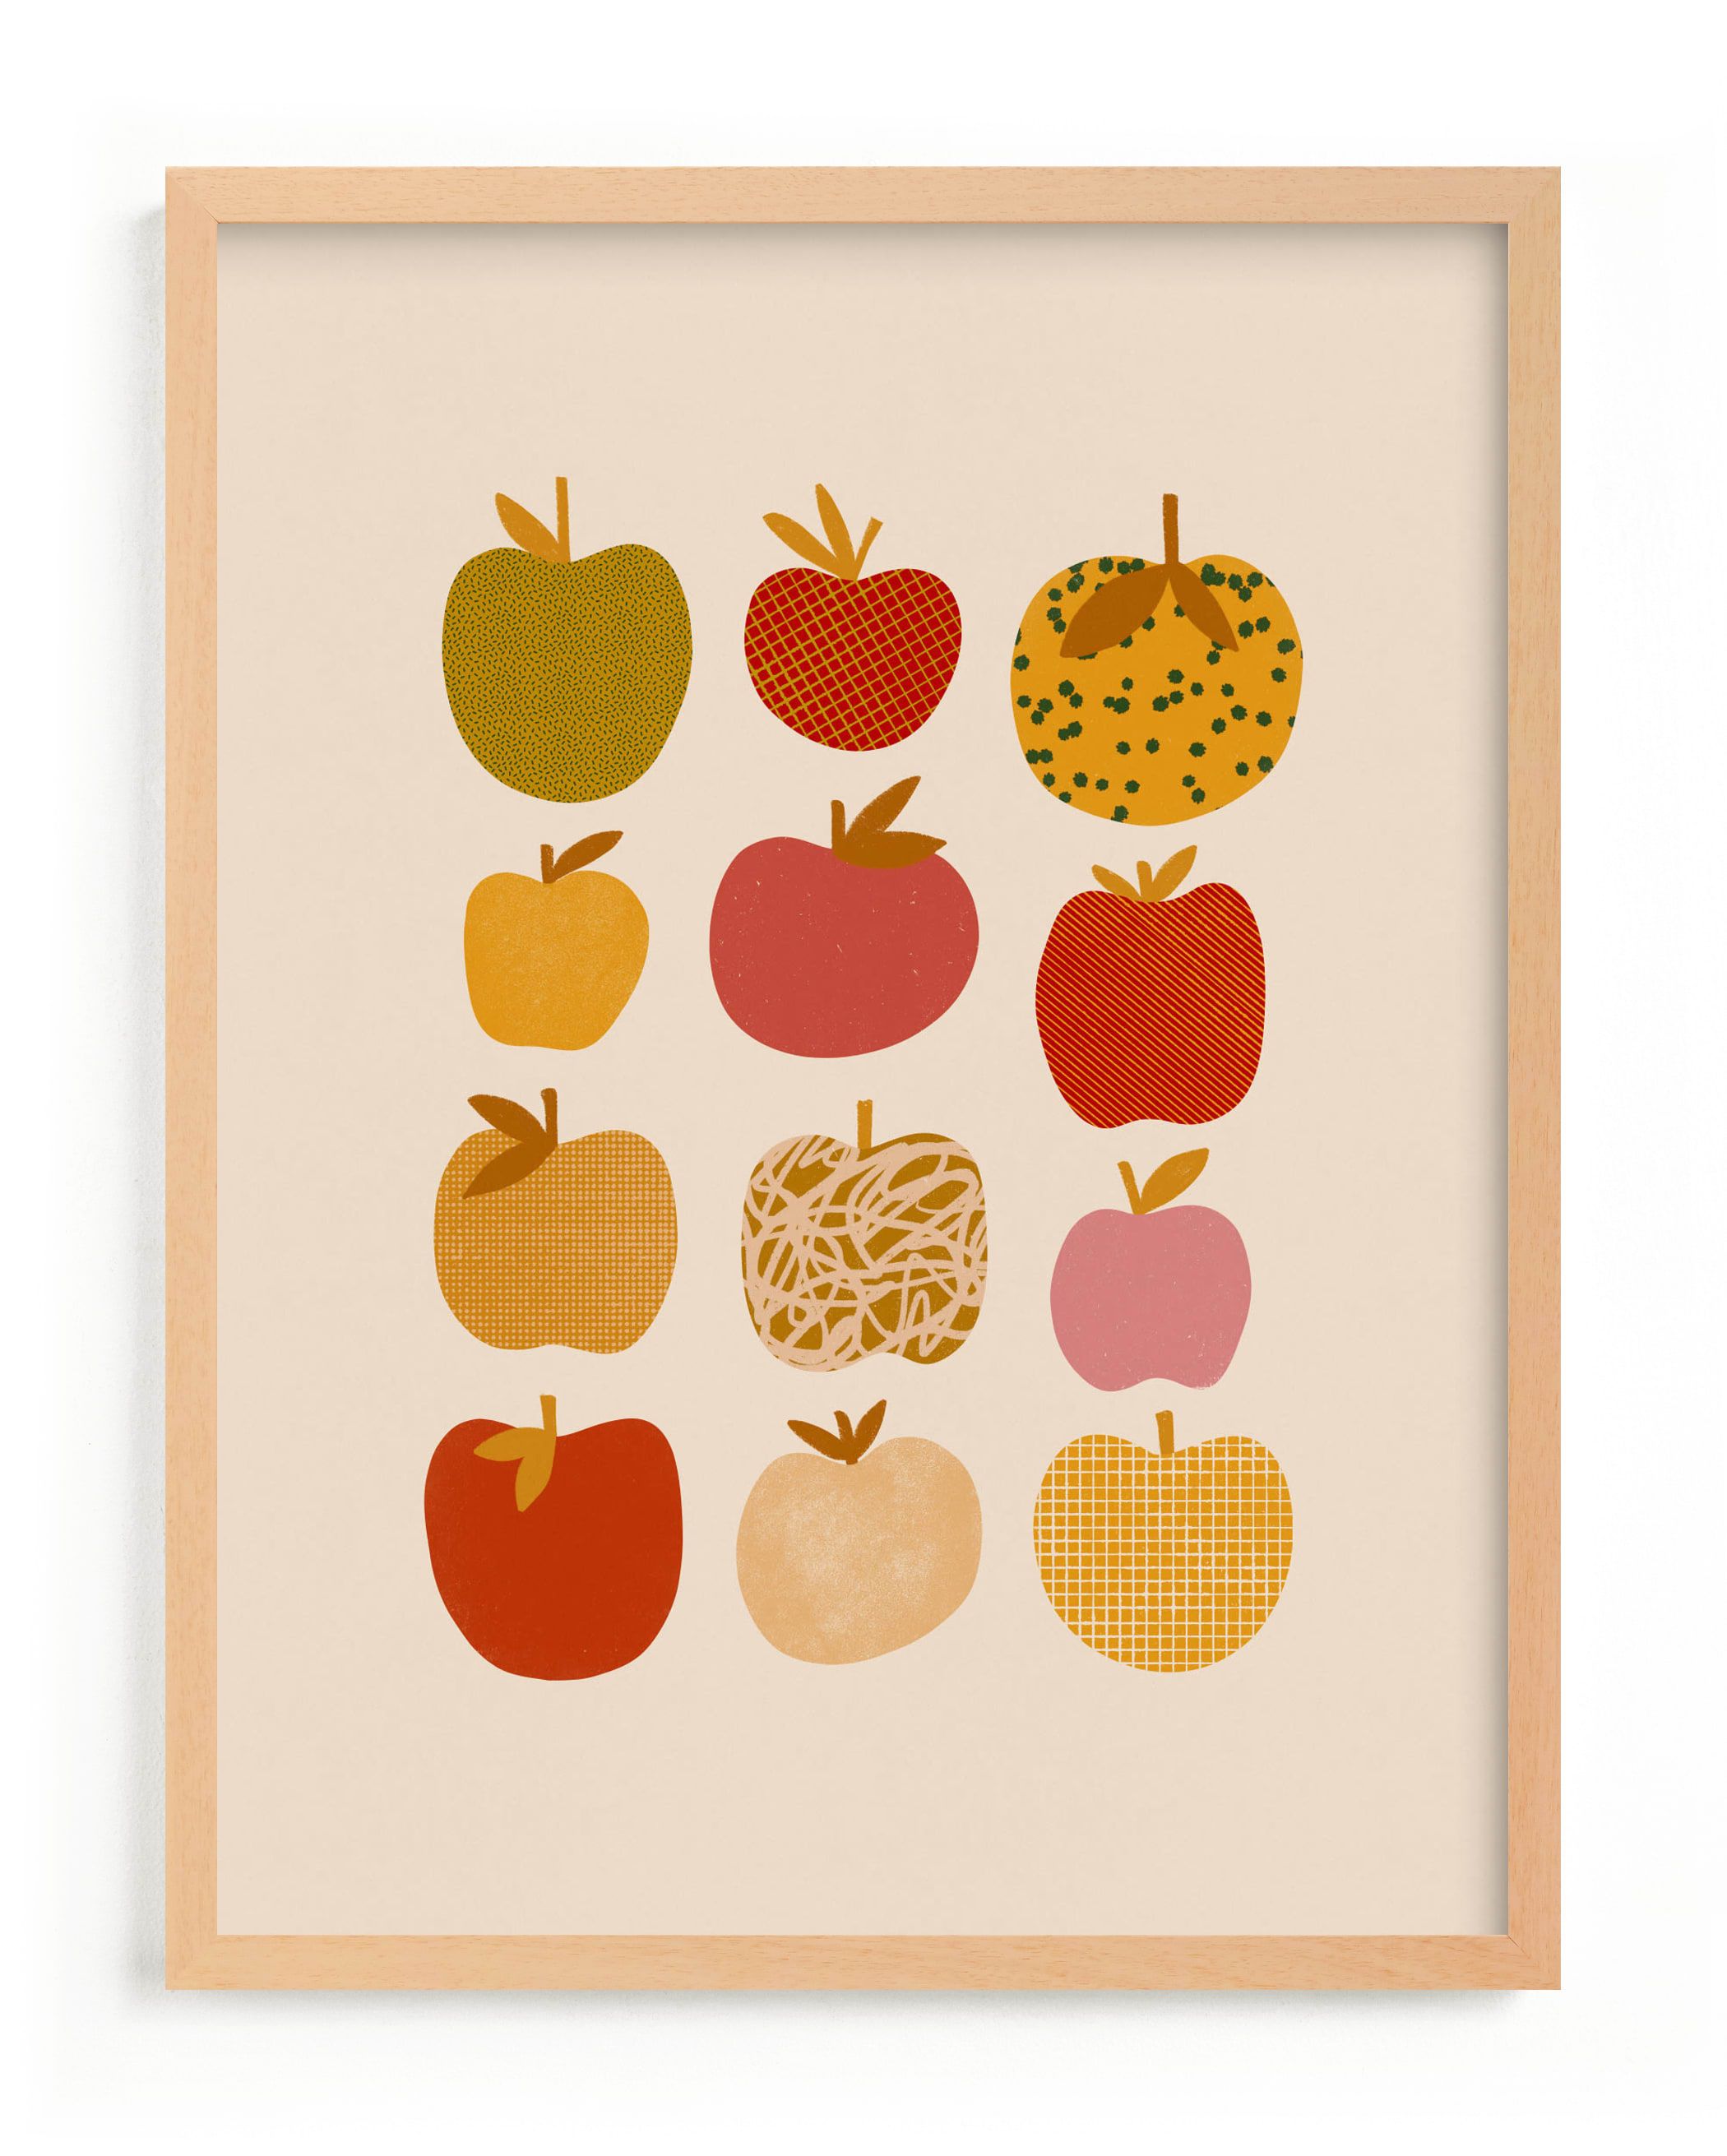 "Apples" - Graphic Limited Edition Art Print by Alisa Galitsyna. | Minted